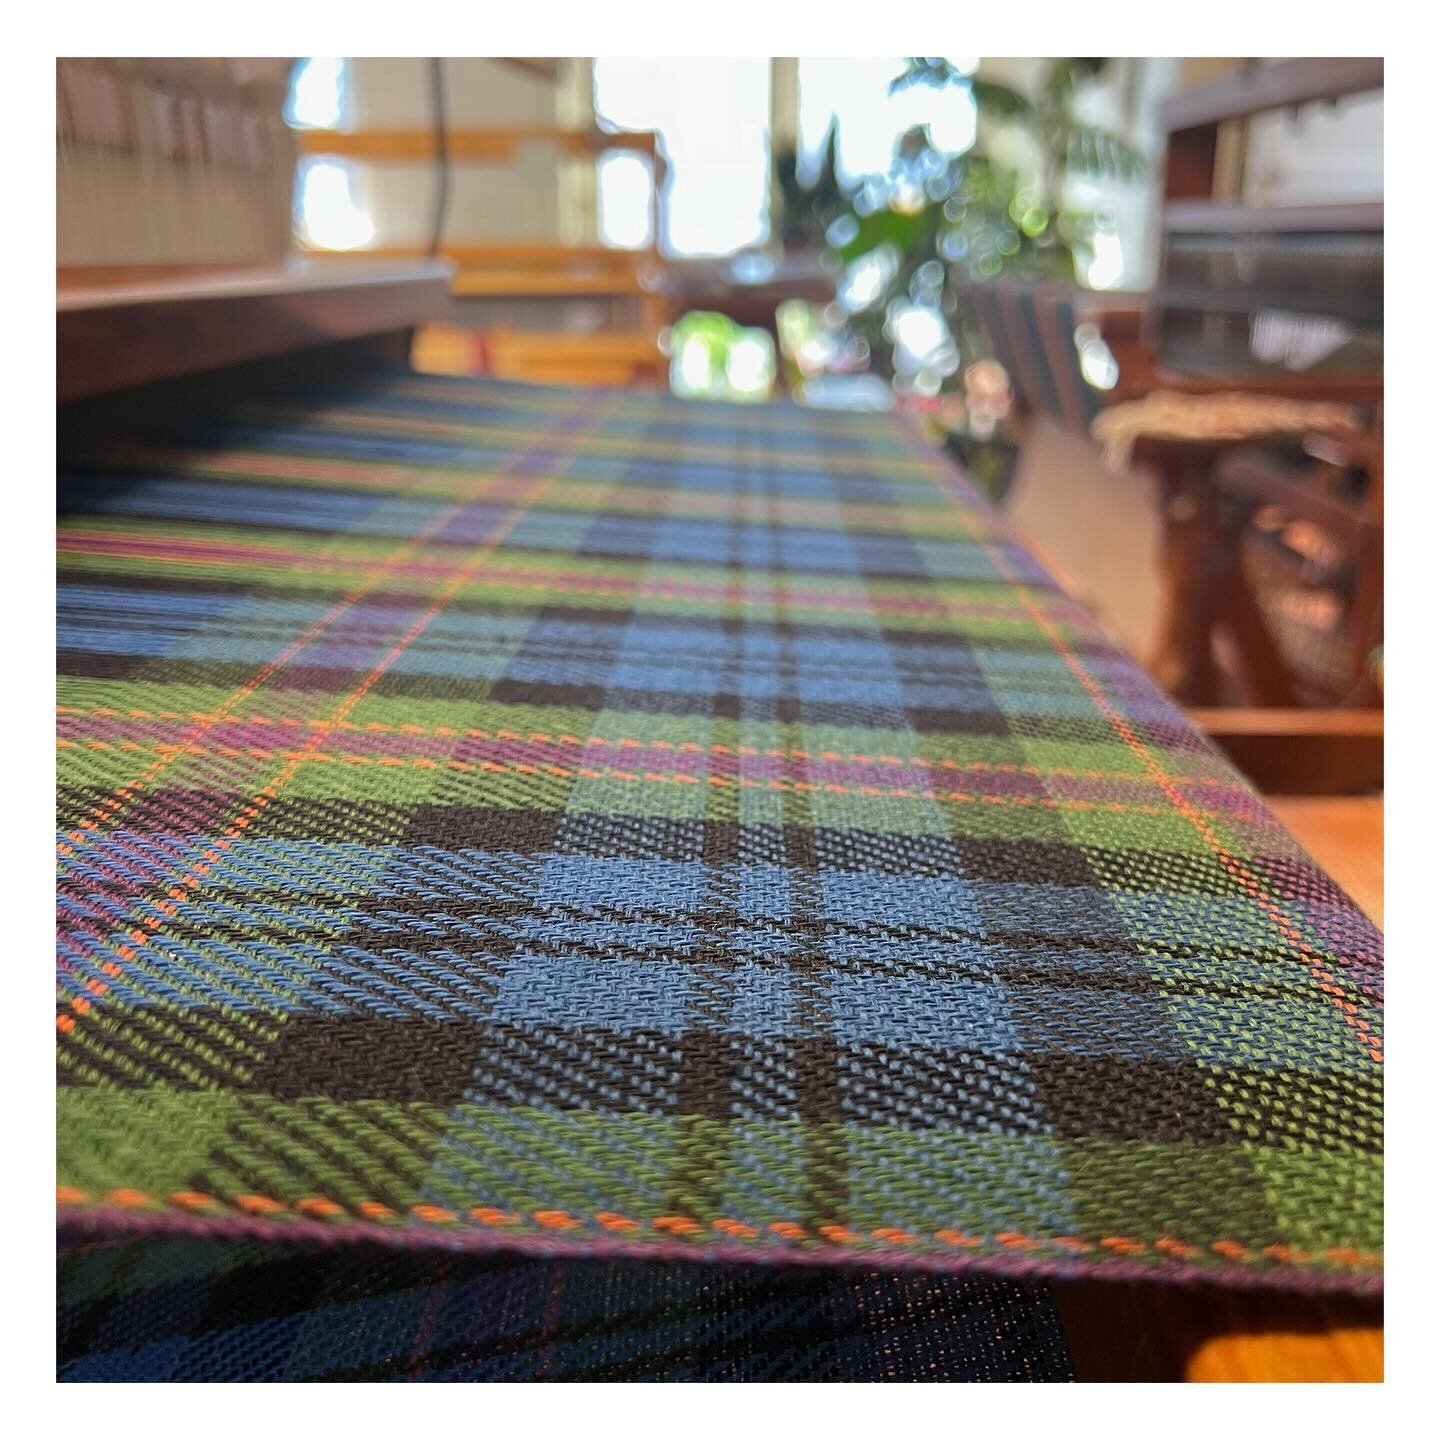 This yarn is such a pleasure to weave with. I think there will be #jaggerspun #merino #wool #scarves coming in the next few months. It&rsquo;s just so darn soft!
.
.
.
.
#tartan #kilt #bespoke #sosoft #weaver #handwoven #handmade